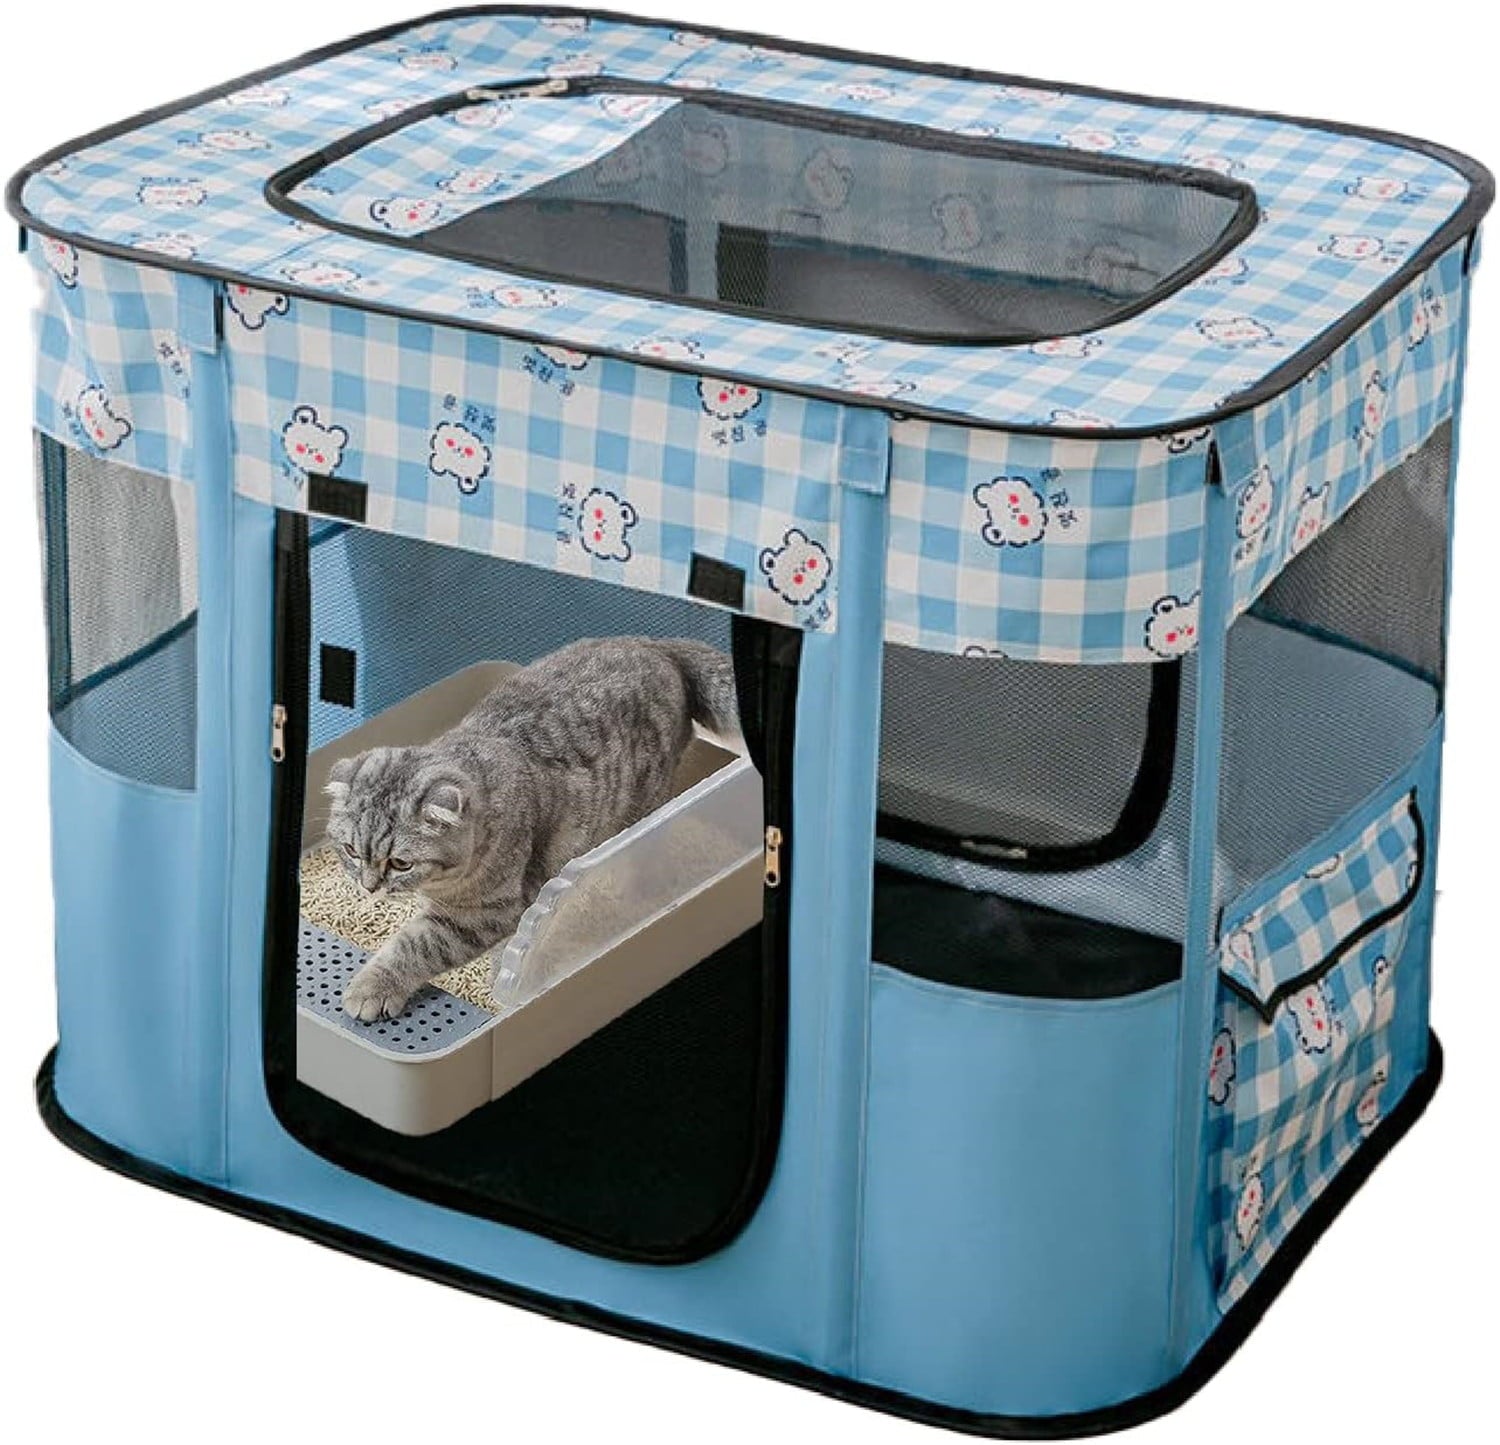 Portable Collapsible Dog Crate， Travel Dog Crate  Foldable for Large Cats and Small Dogs Indoor and Outdoor